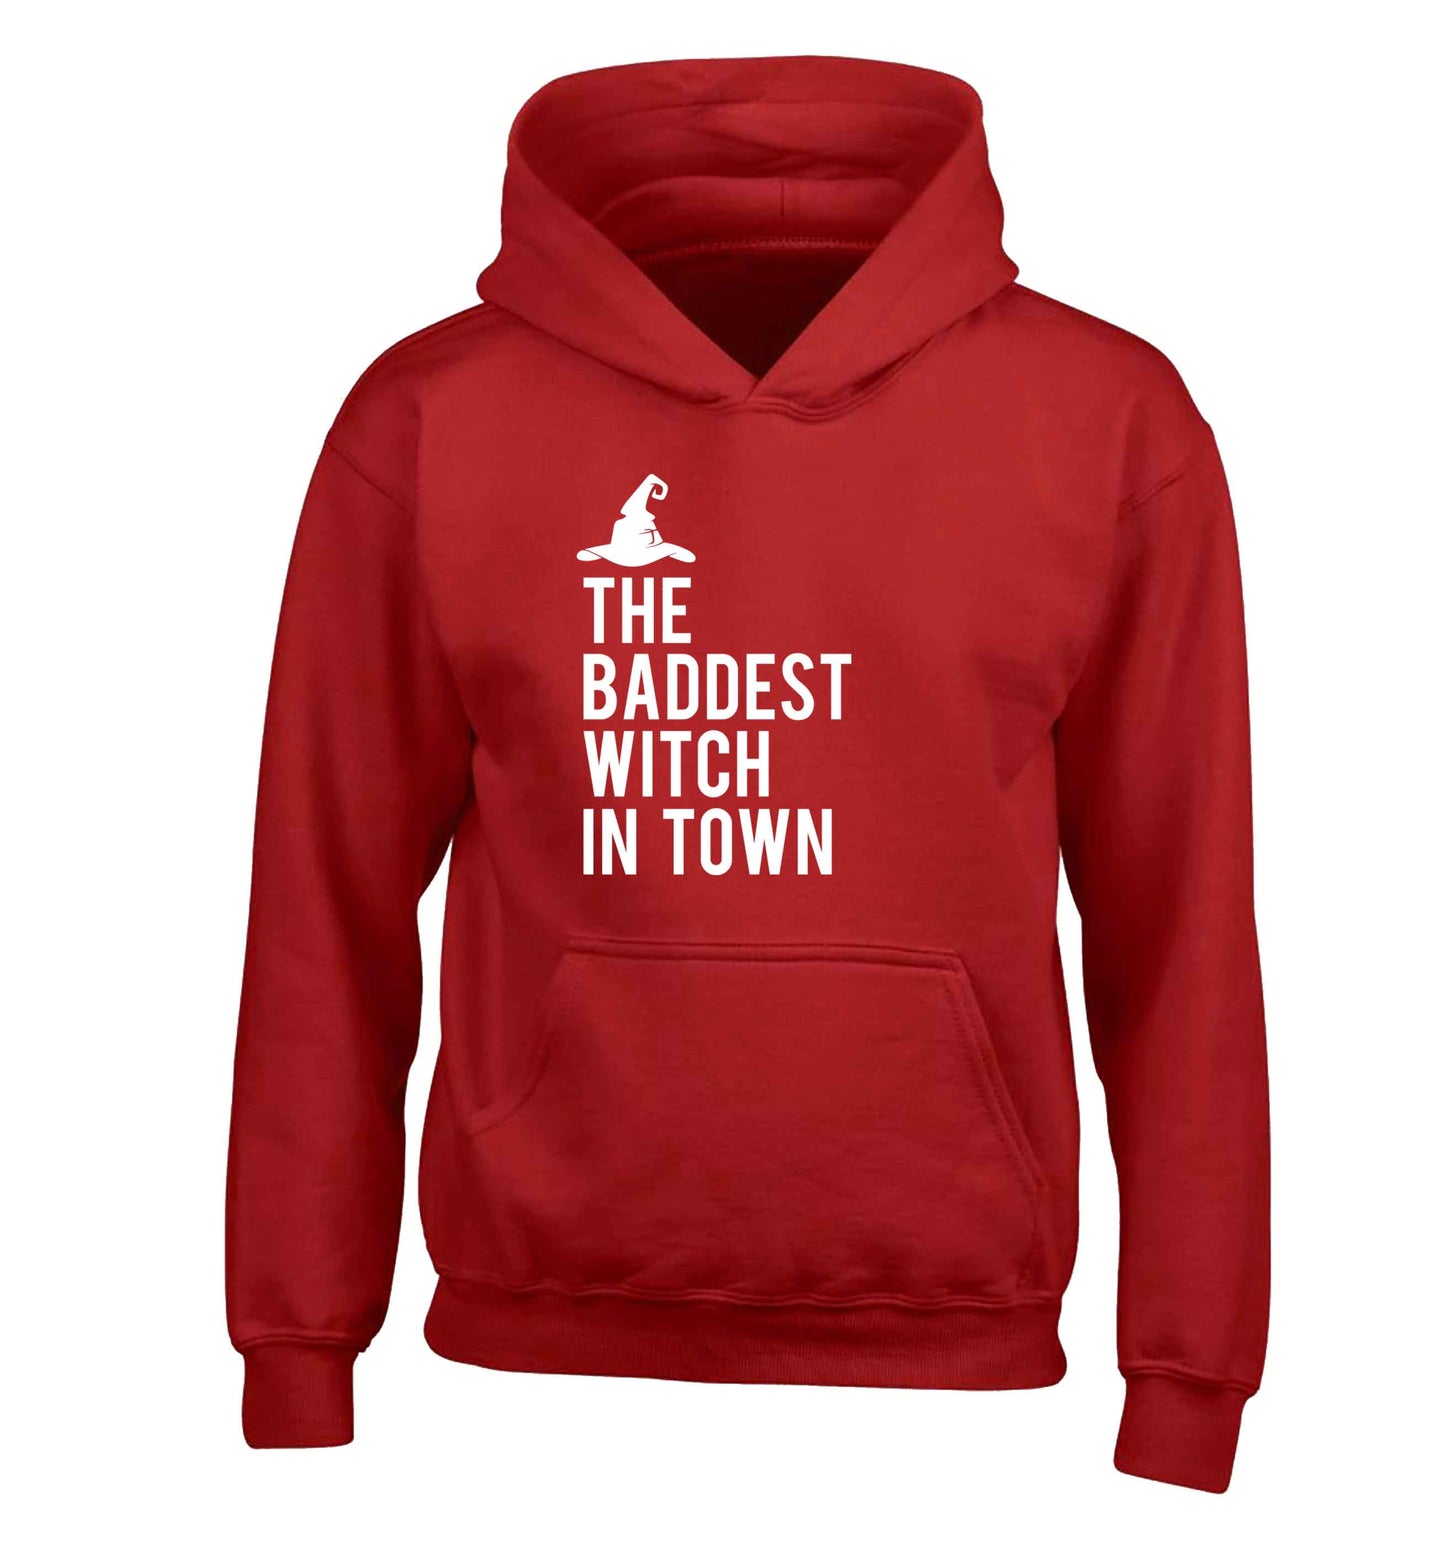 Badest witch in town children's red hoodie 12-13 Years